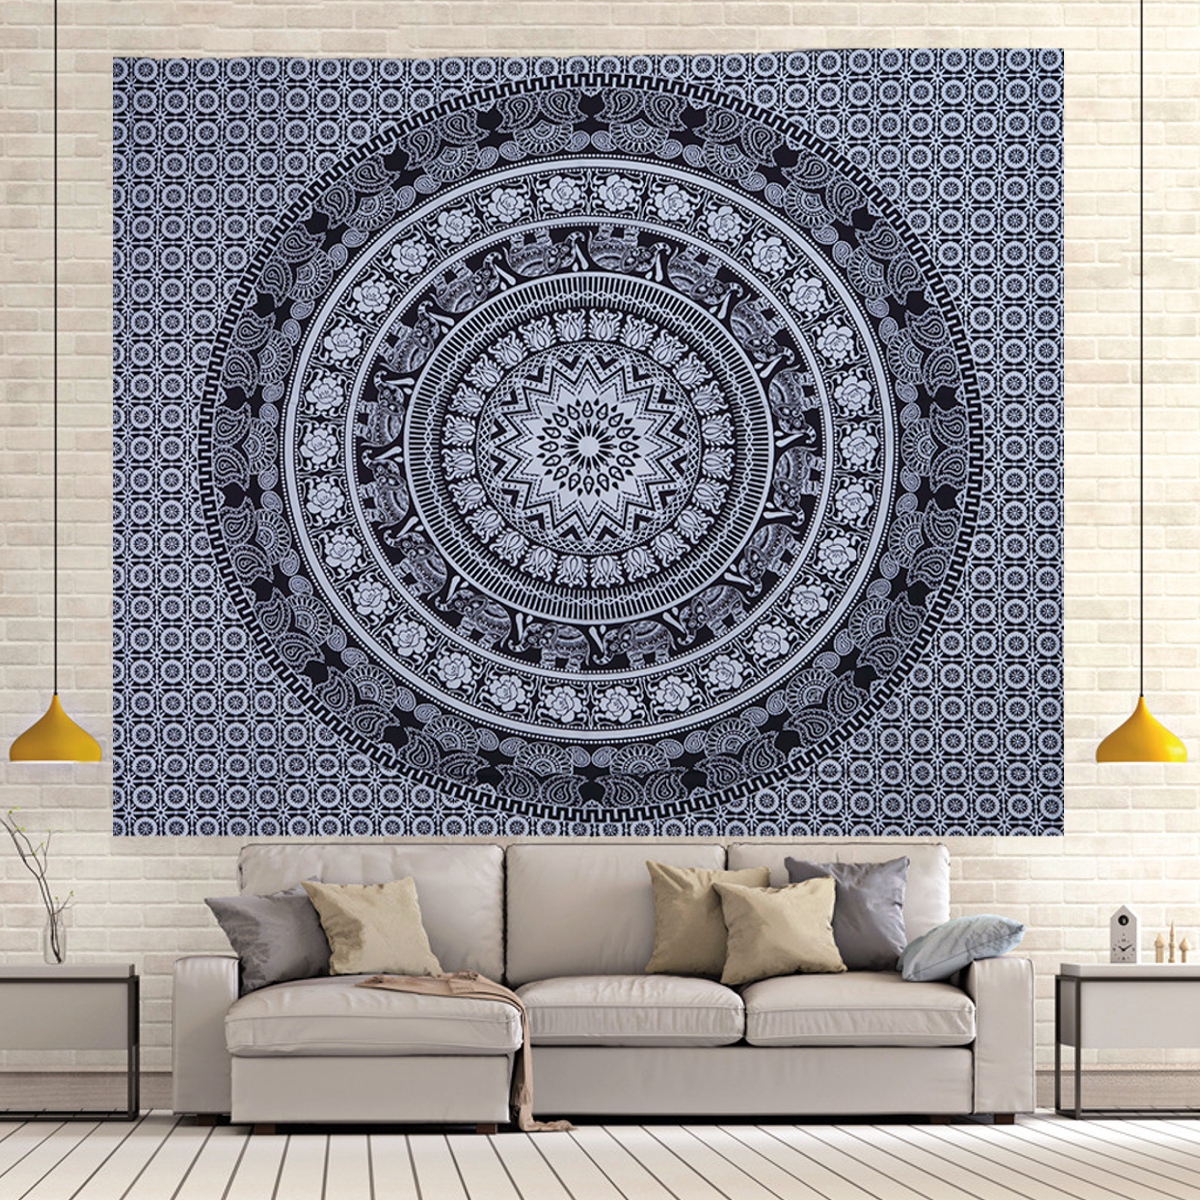 Find 210 150cm Mandala Tapestry Room Wall Hanging Art Tapestry Pictures Camping Tent Sofa Cover Bedspread Home Office Decoration for Sale on Gipsybee.com with cryptocurrencies